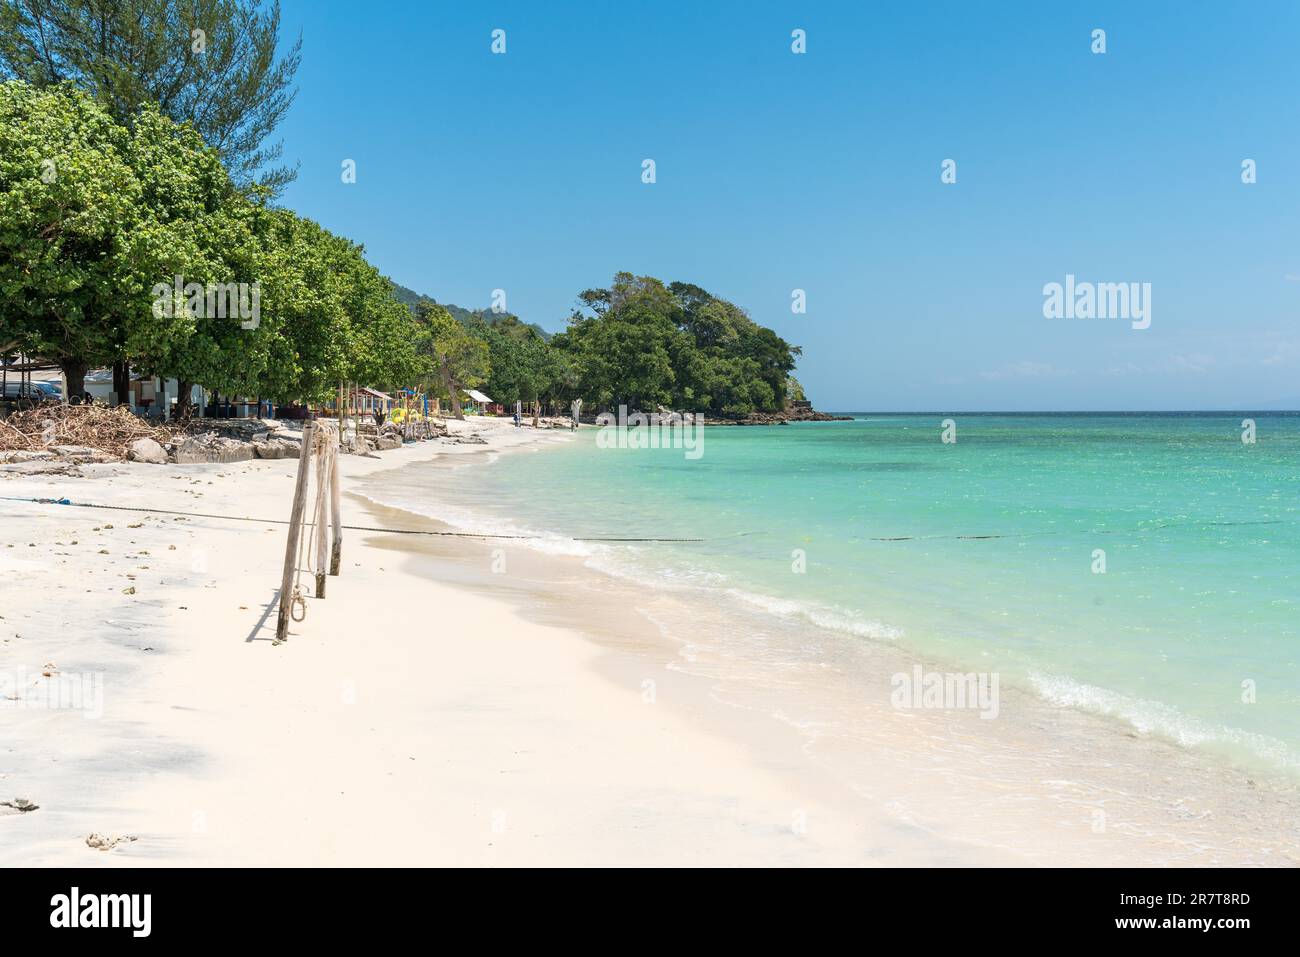 The village Pasir Putih with its dreamlike white sandy beach in the south of the Weh island, Sabang, the northernmost point of Indonesia Stock Photo